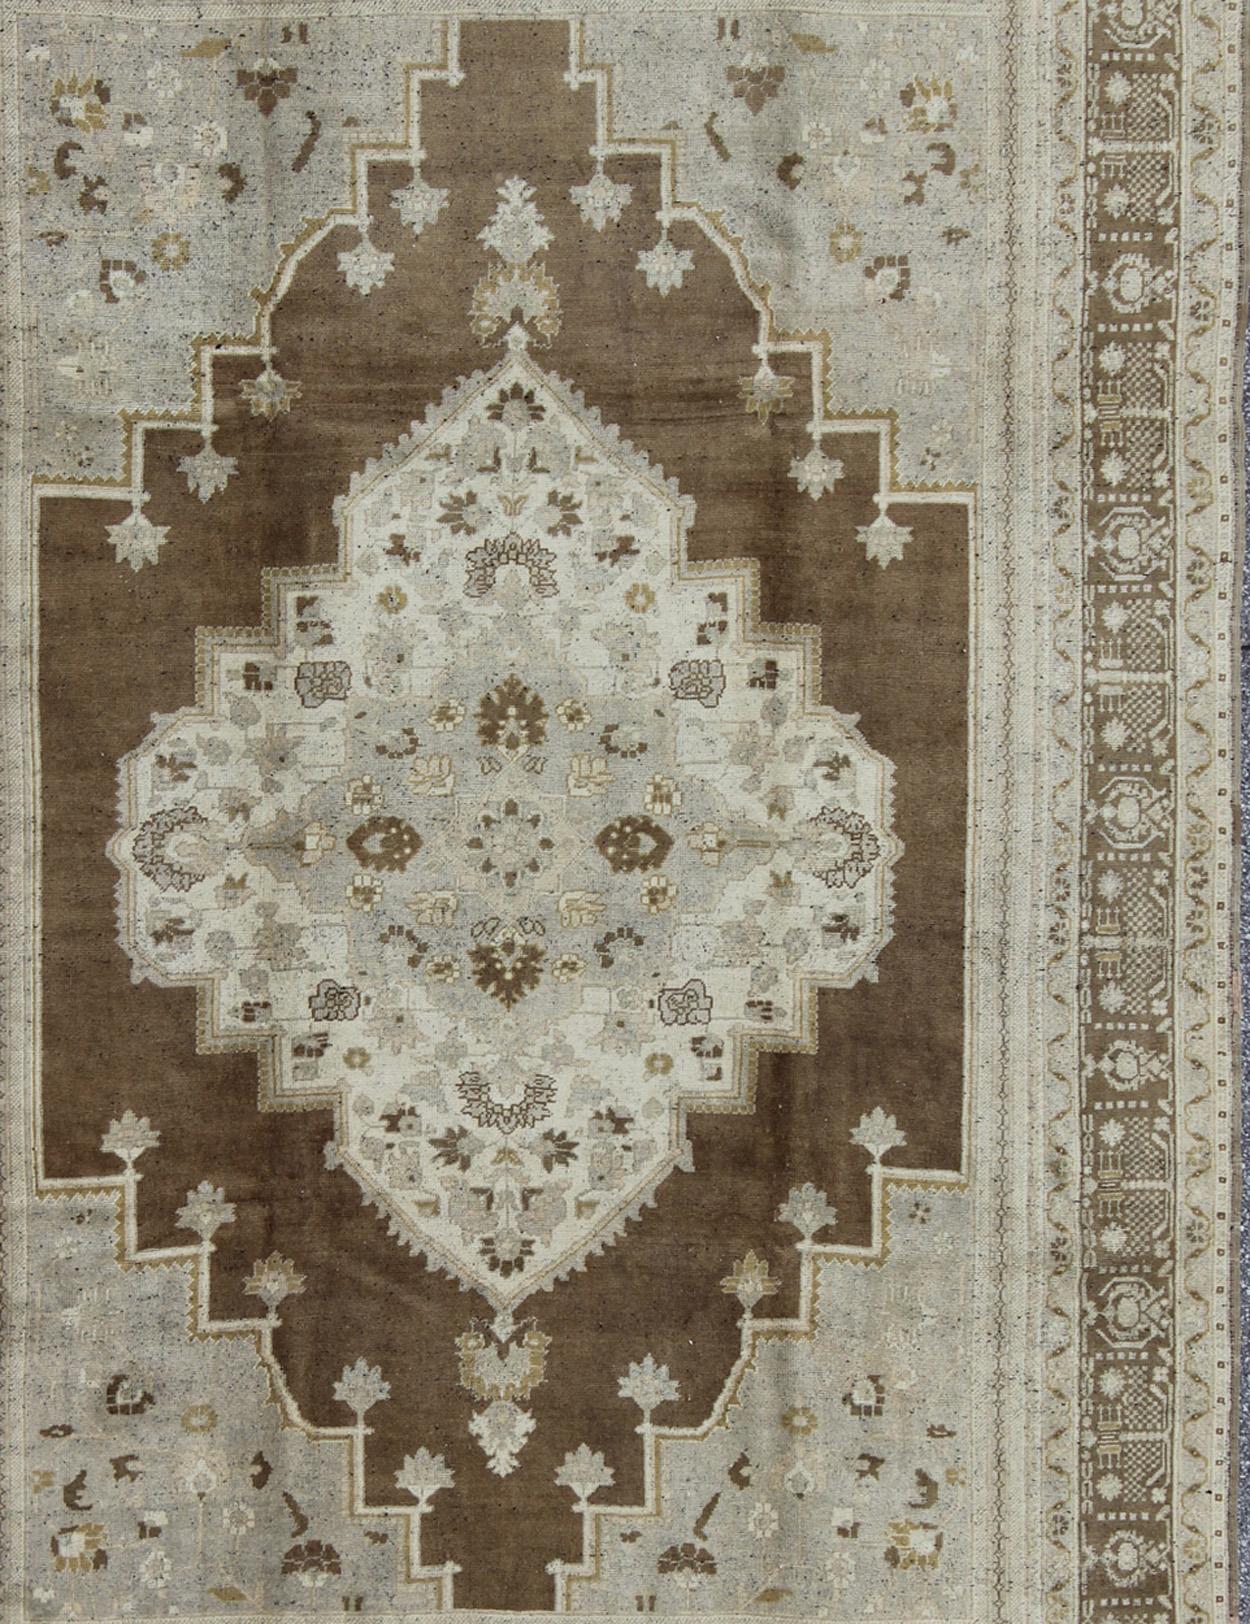 Measures: 7'4 x 11'4

This lovely Turkish Oushak from the 1940's features a central medallion, which rests on a dark brown background, is surrounded by a light brown border, and is characterized by a color palette of ivory with gray, brown and green